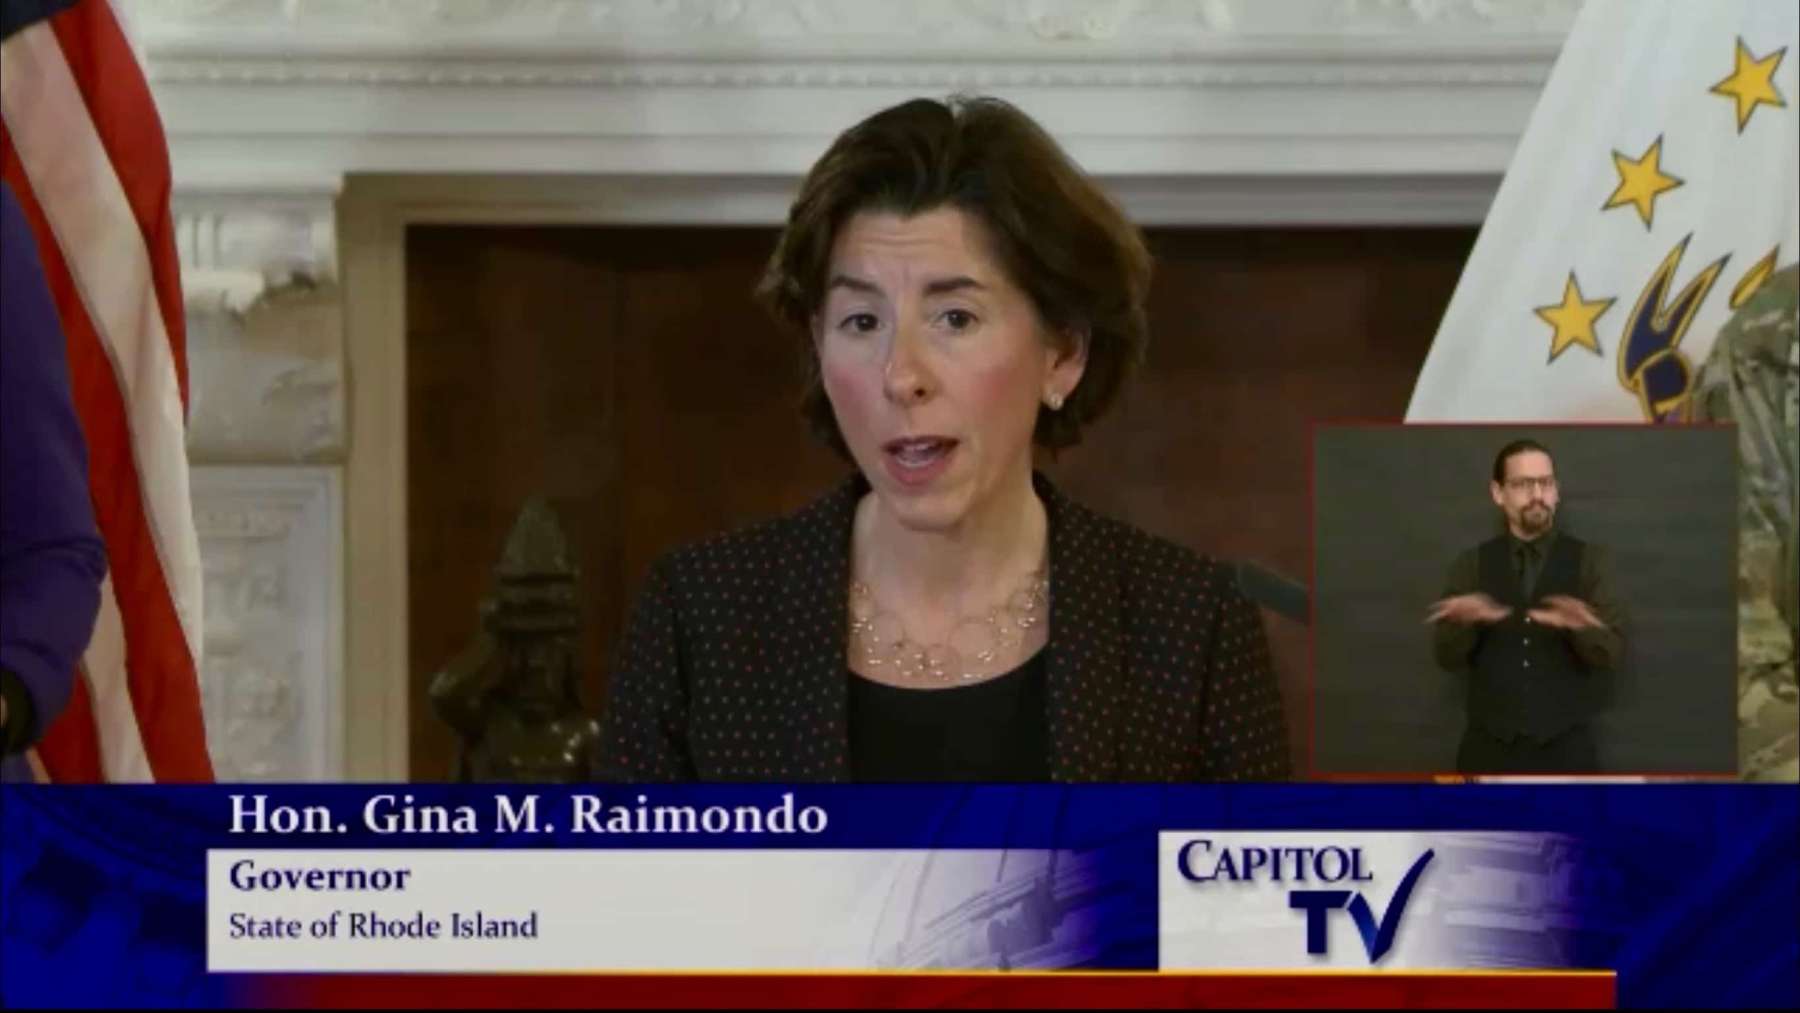 Rhode Island News: Phil Eil: As Governor Raimondo leaves for Washington, what does it mean to be a leader in this moment?